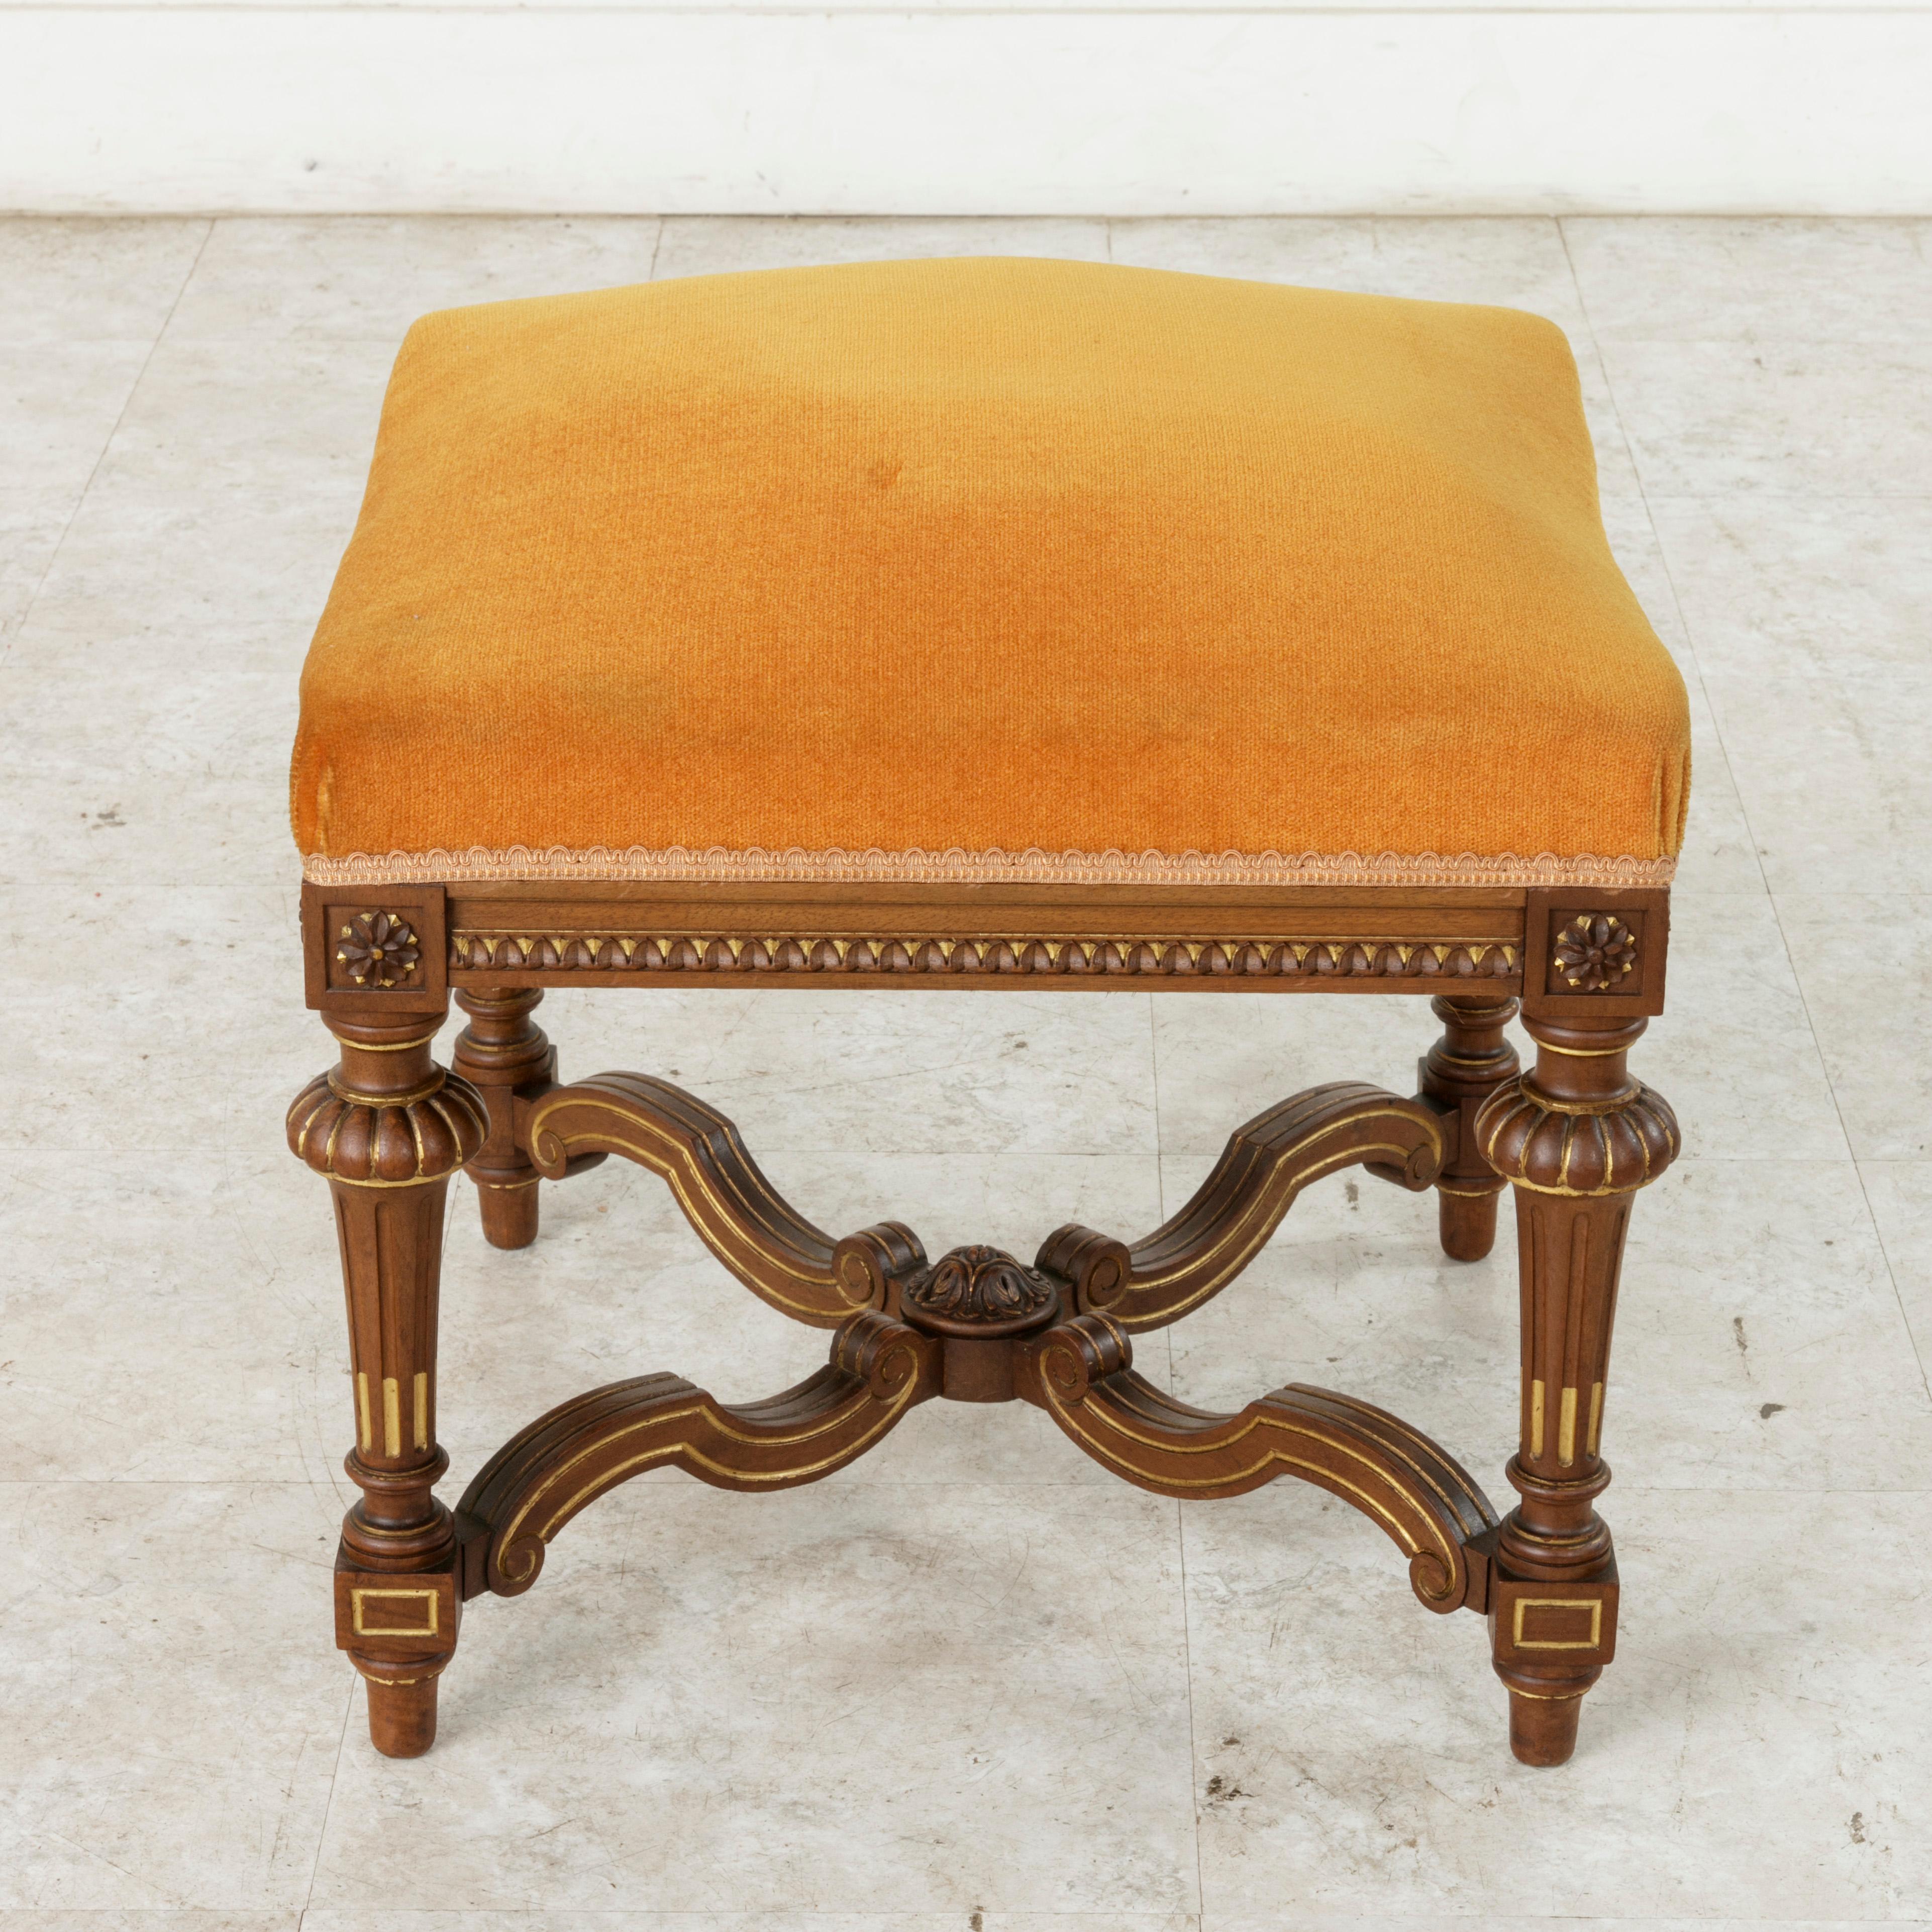 This turn of the 20th century French Louis XIV style walnut banquette, stool, or ottoman features hand painted gold detailing on the legs and stretchers. Carved details of rosettes adorn the die joints and carved rais de coeur surrounds the lower